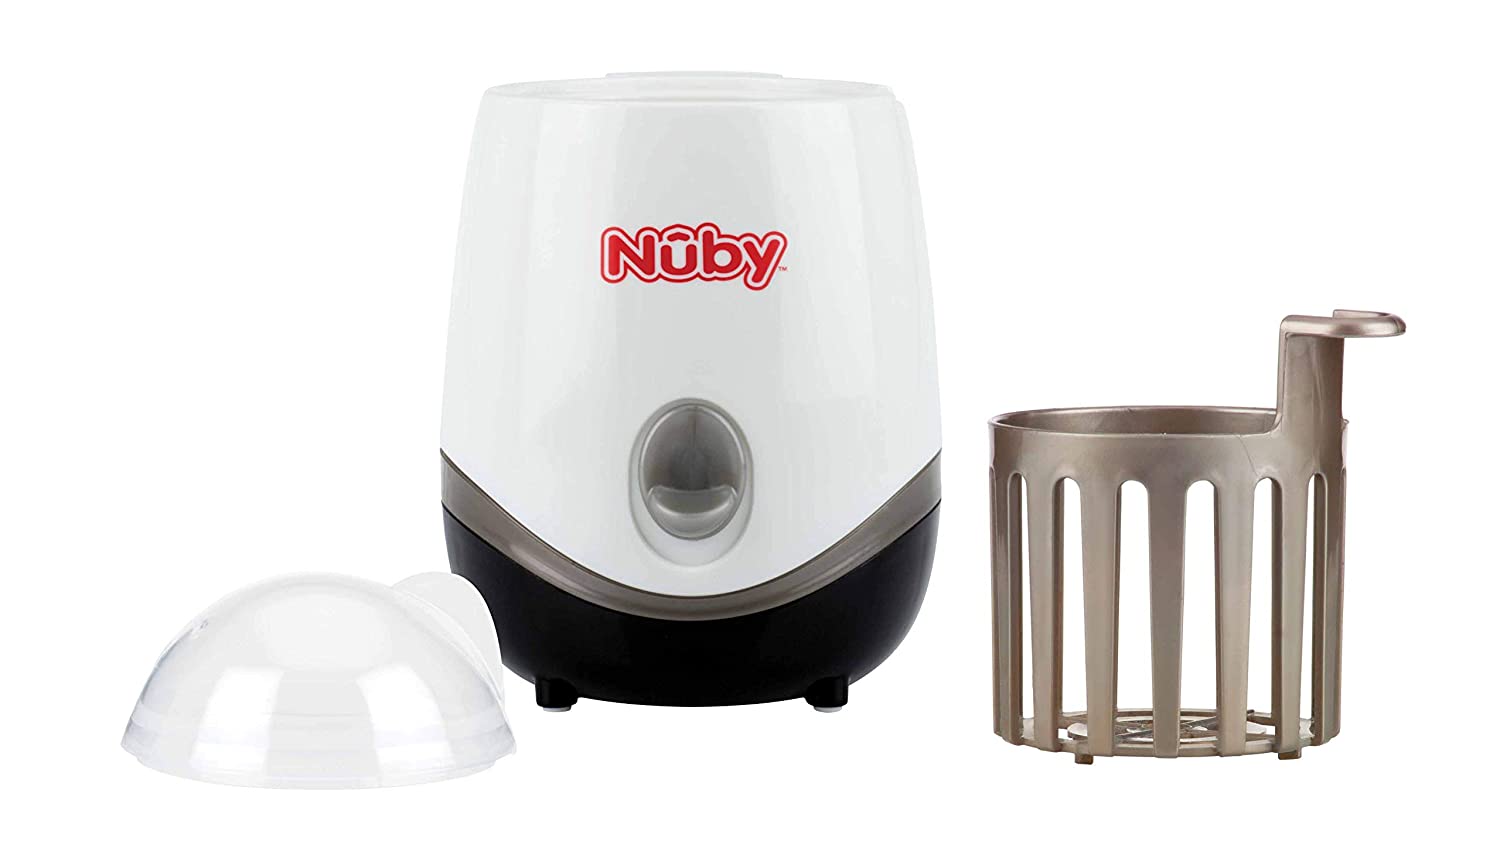 Nuby One-Touch 2-in-1 Electric Baby Bottle Warmer